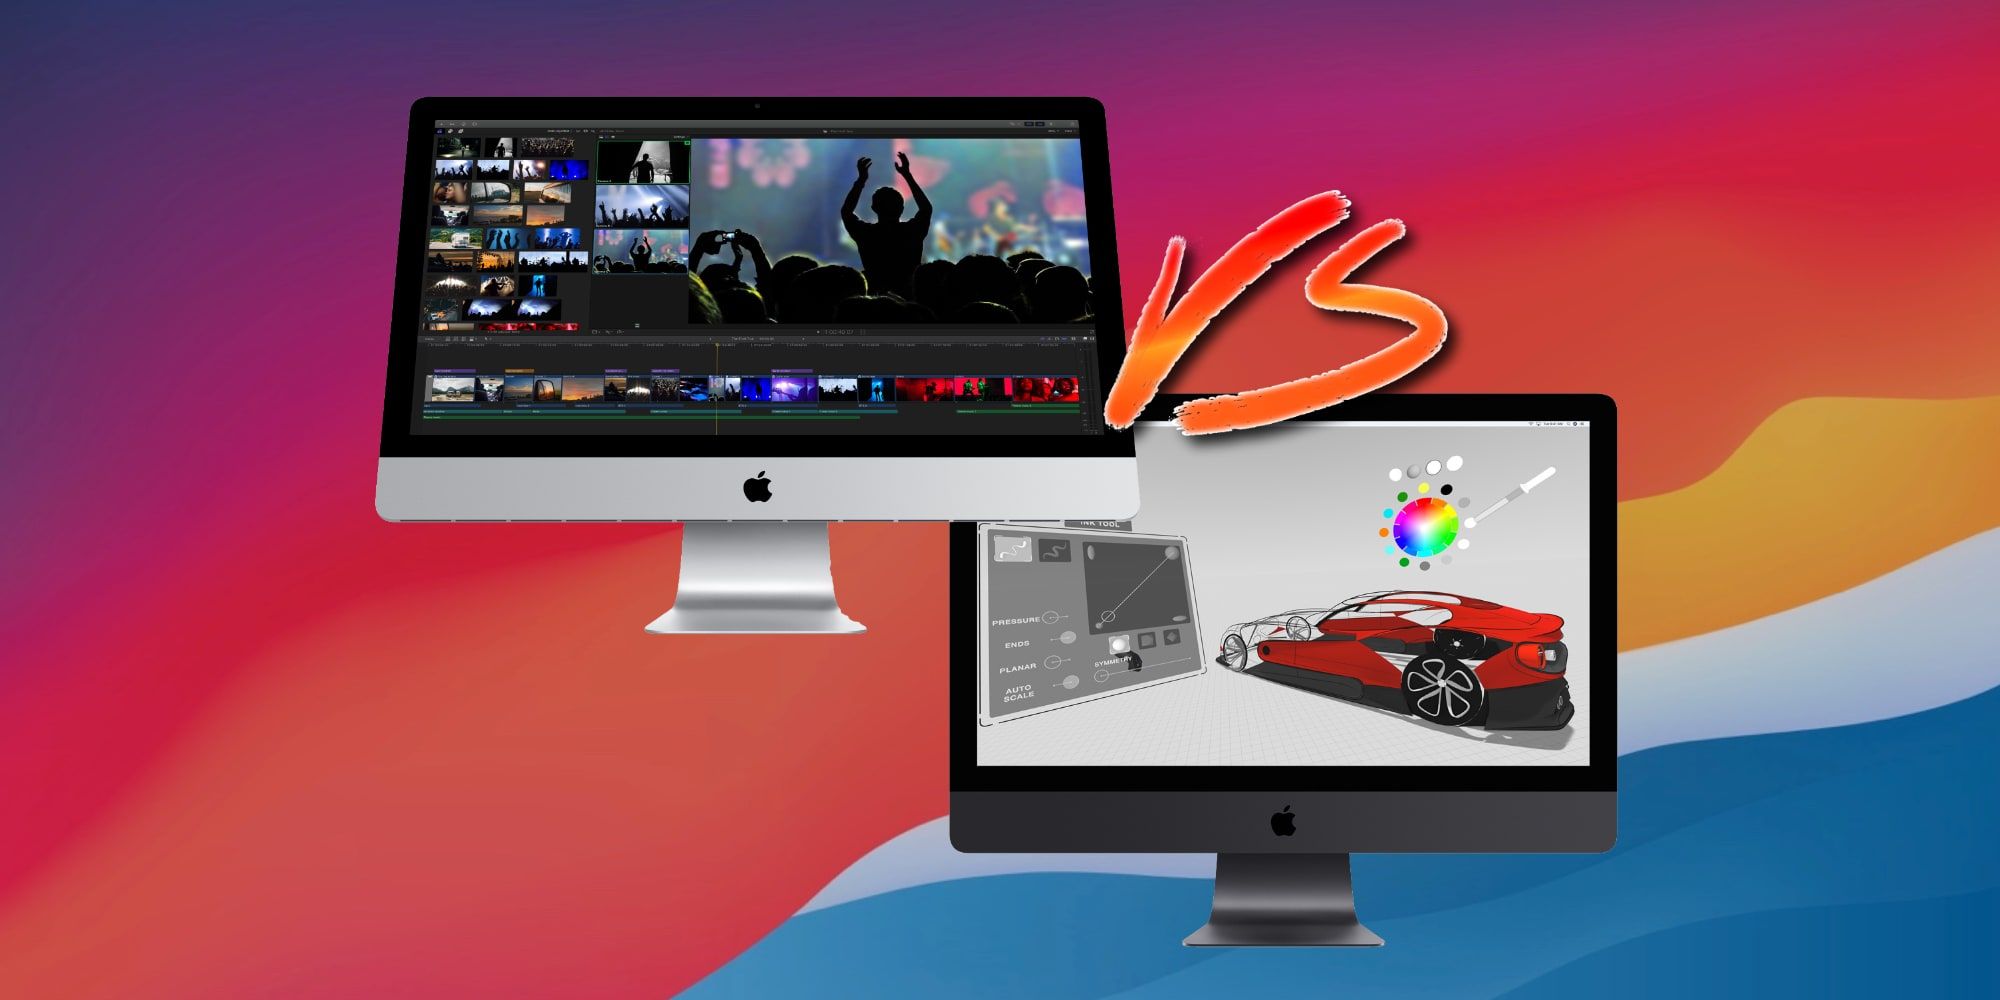 Download Imac Vs Imac Pro What S The Difference Best Version To Buy Now